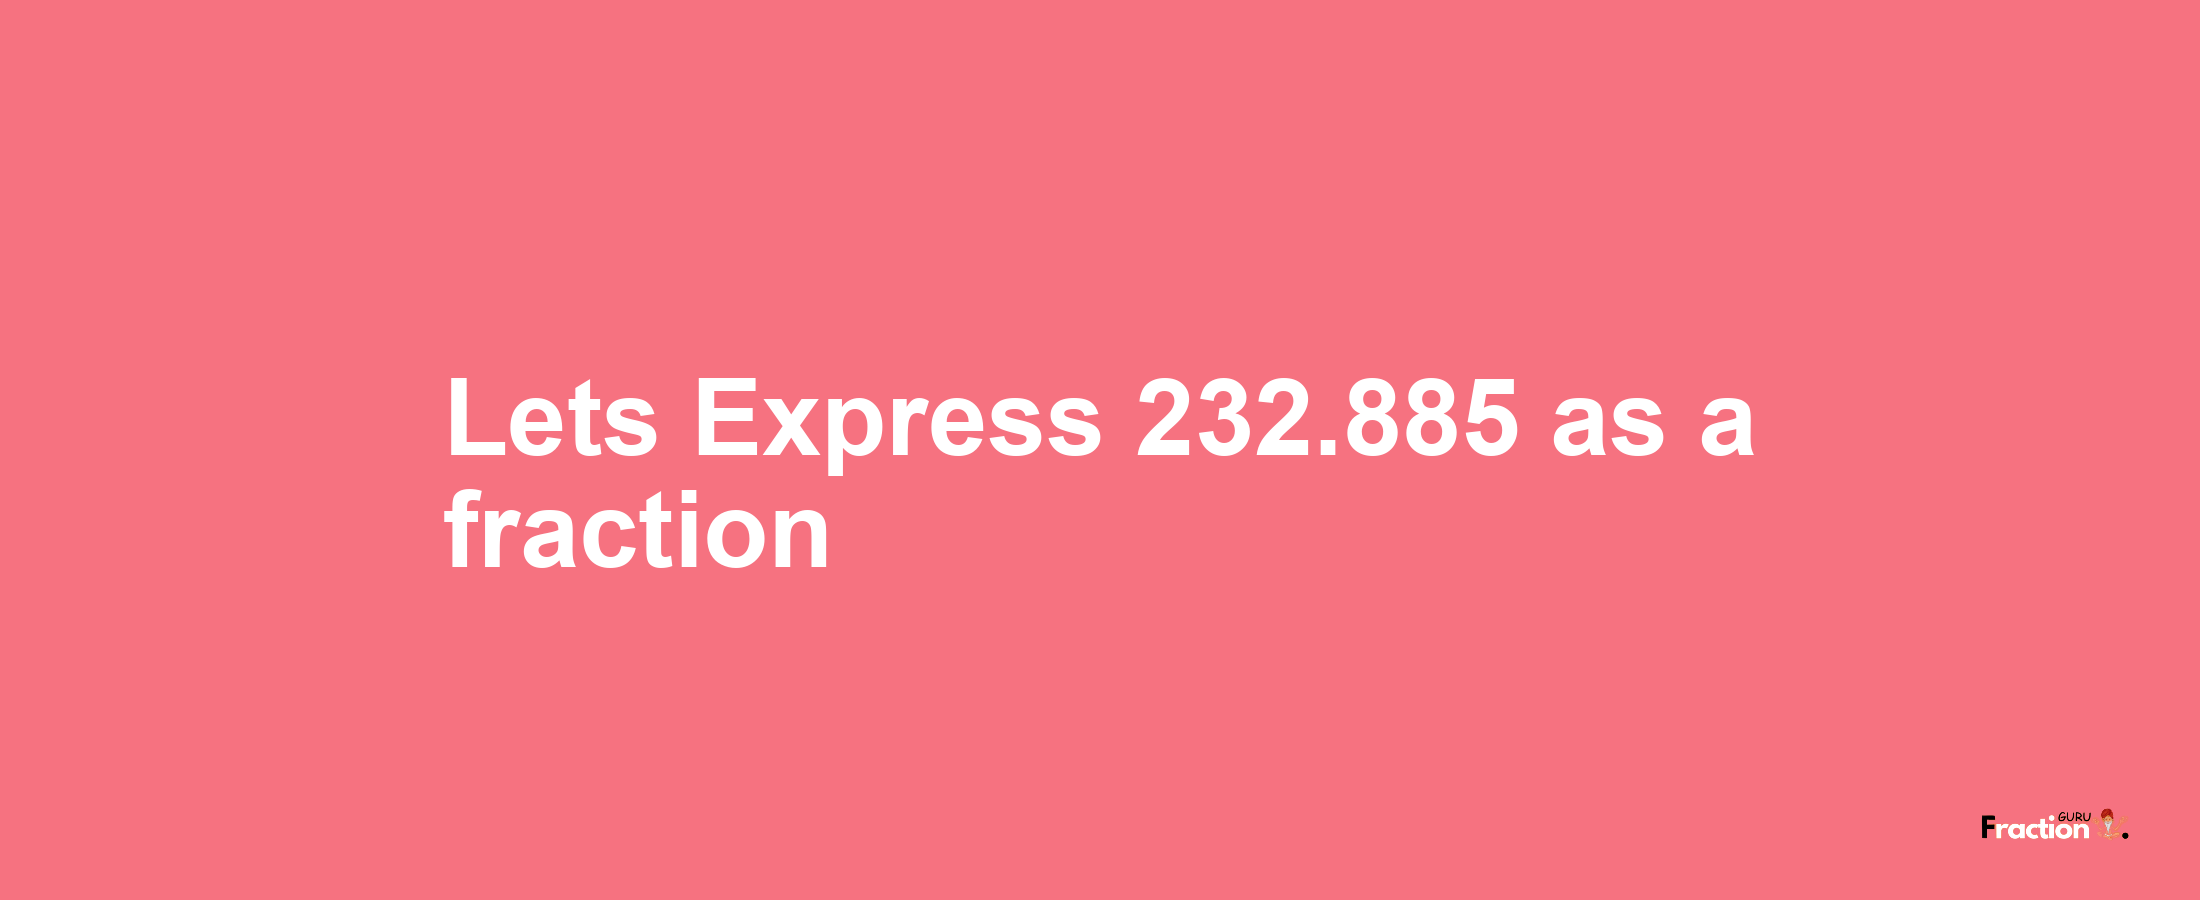 Lets Express 232.885 as afraction